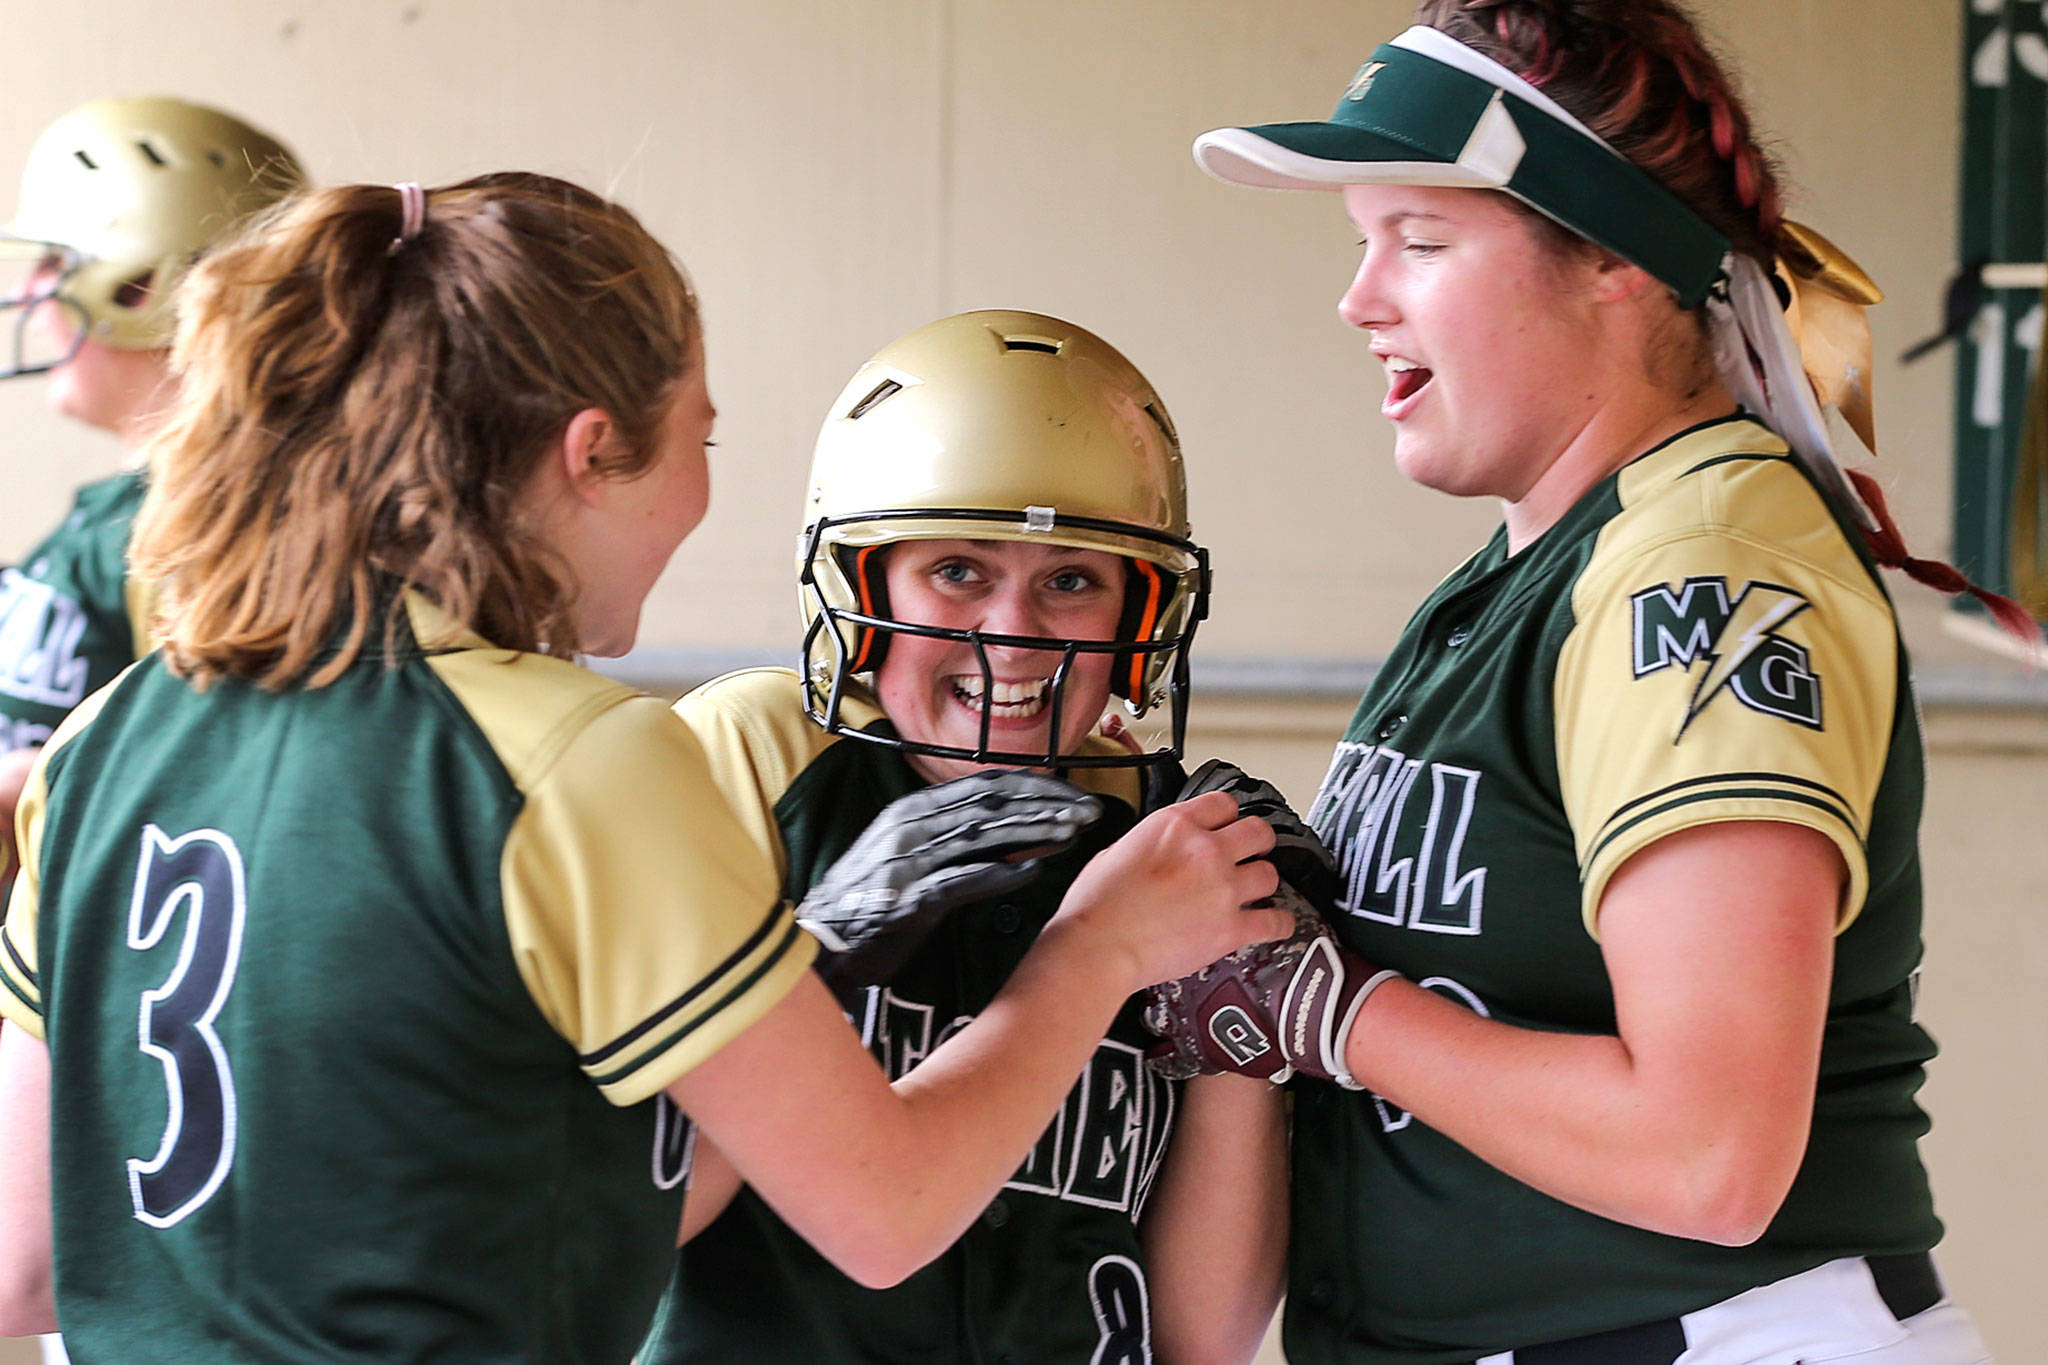 Marysville Getchell’s Skyleigh Morrison (center) is congratulated by teammates Erica Martin (left) and Brionna Palm after scoring a run against Marysville Pilchuck on April 26, 2019, at Marysville Getchell High School. (Kevin Clark / The Herald)